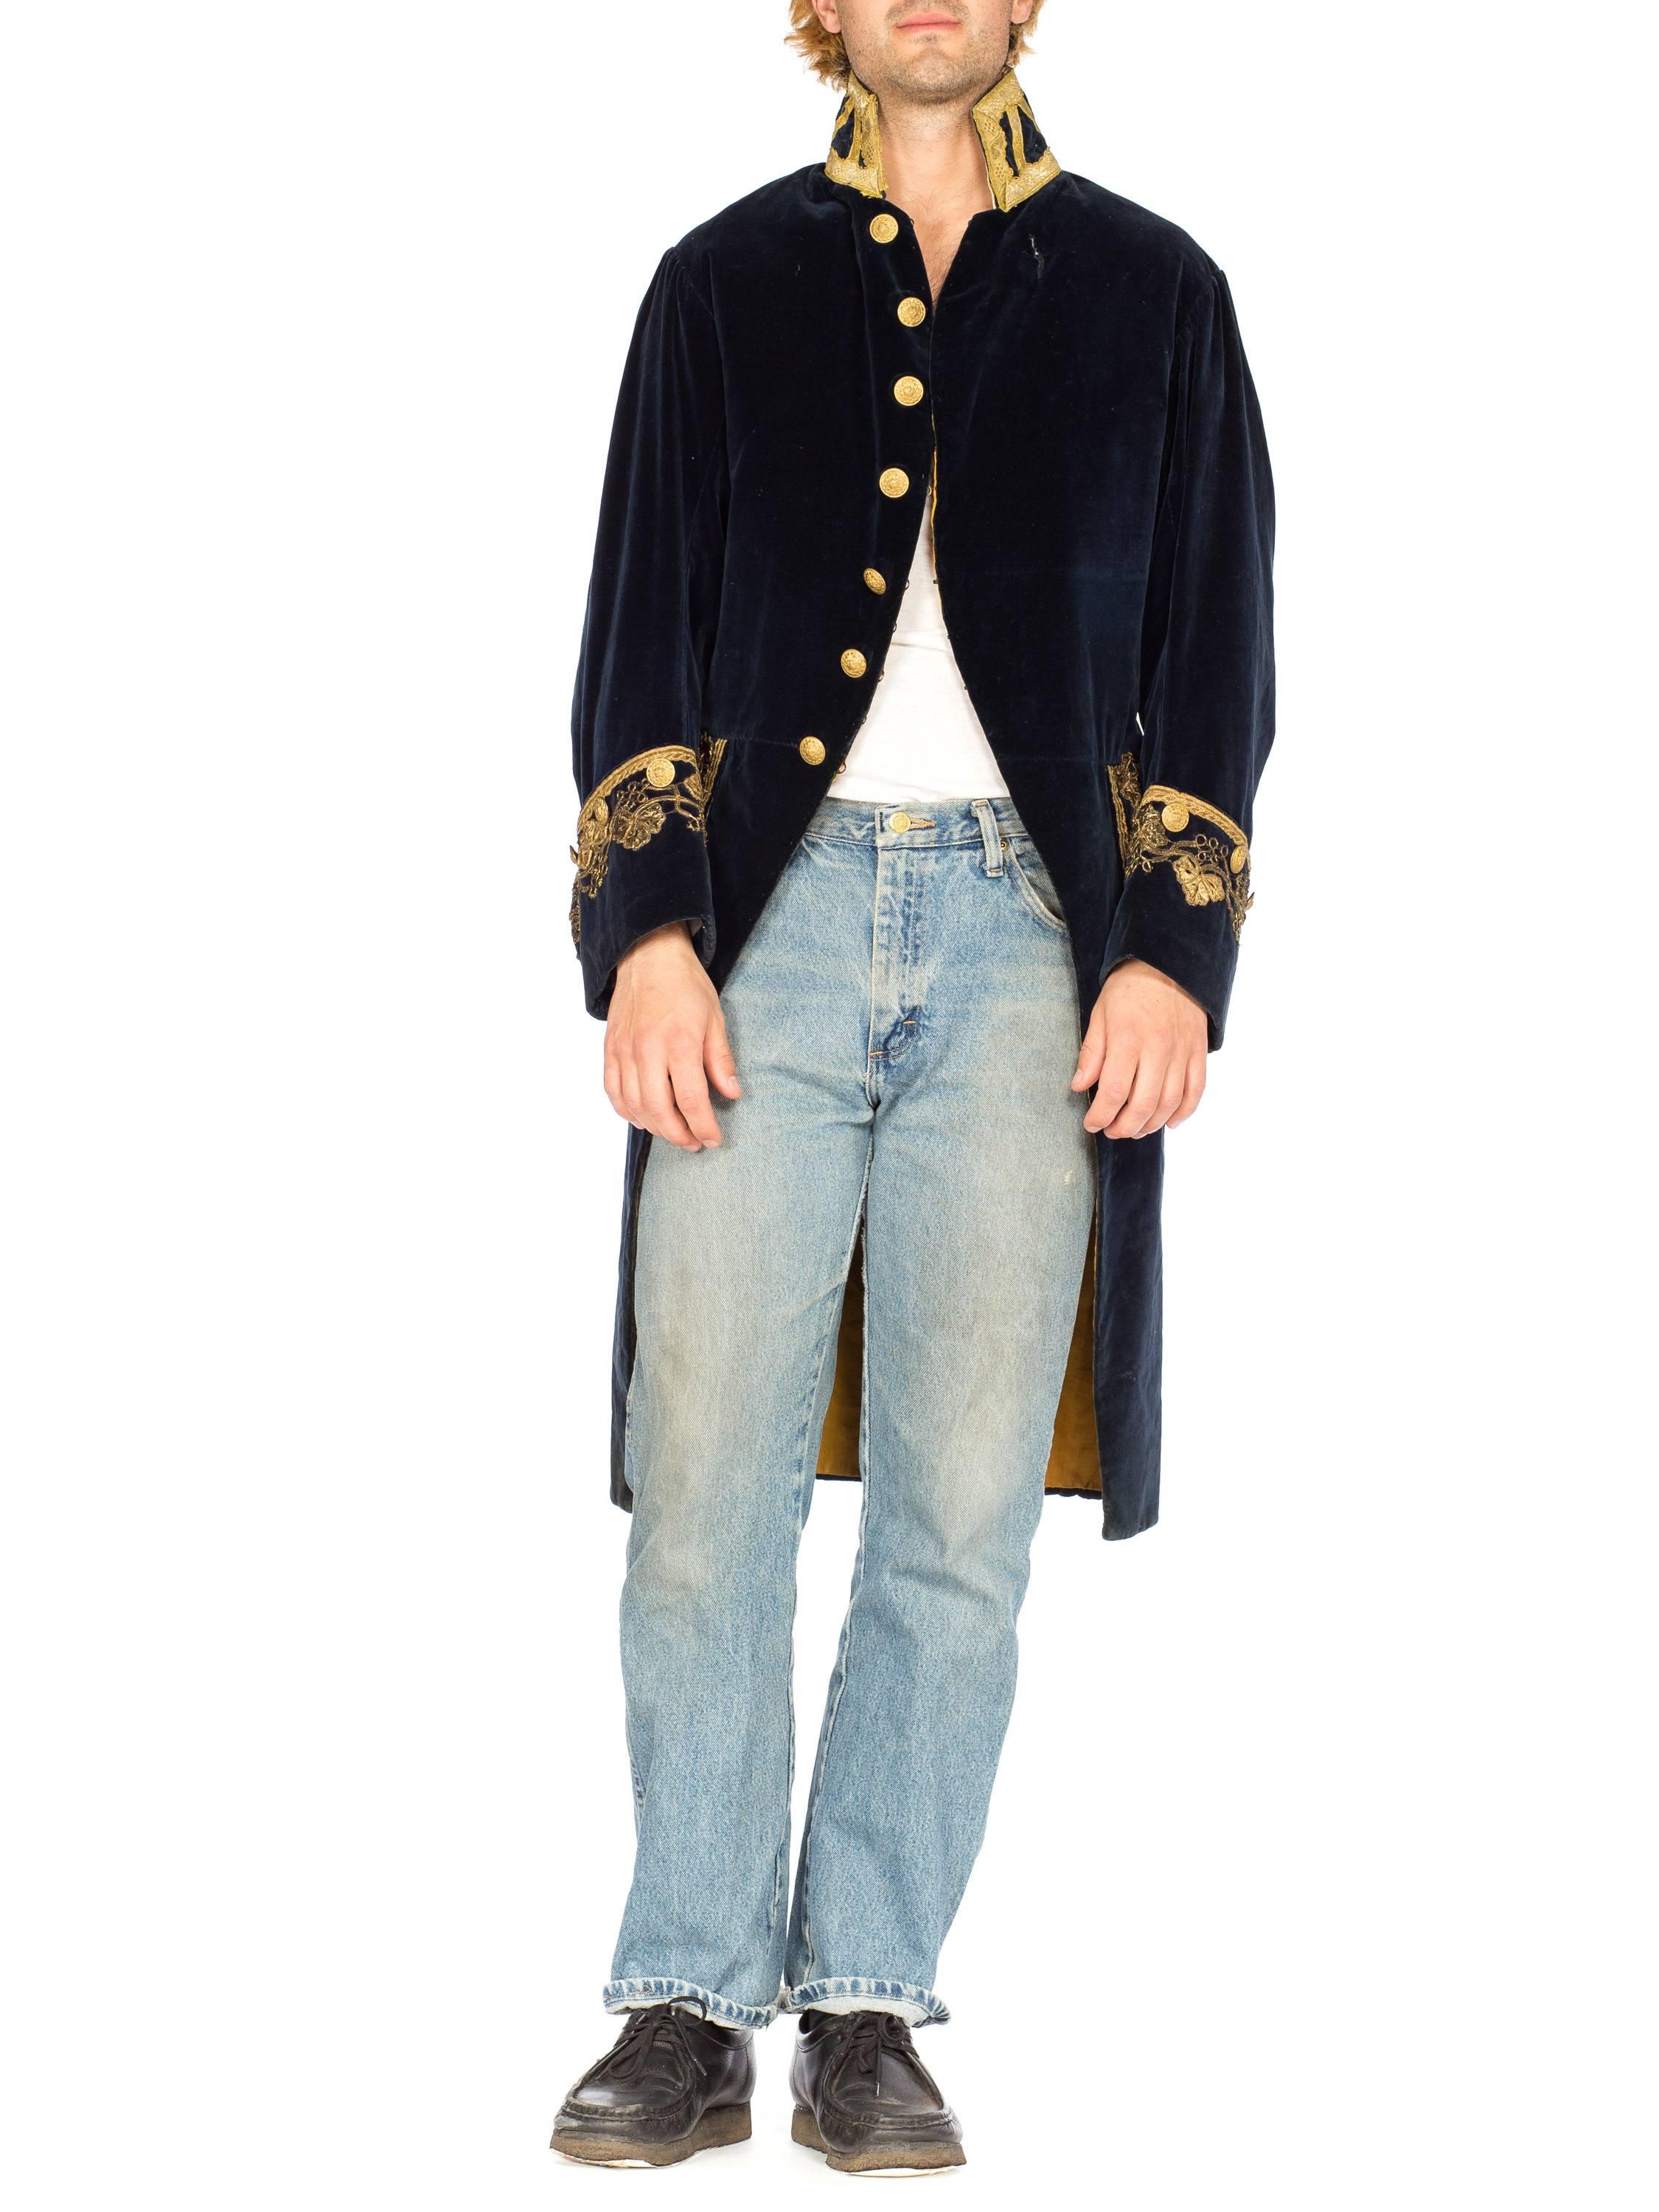 Victorian Men's Frock Coat in the 18th Century Style  1